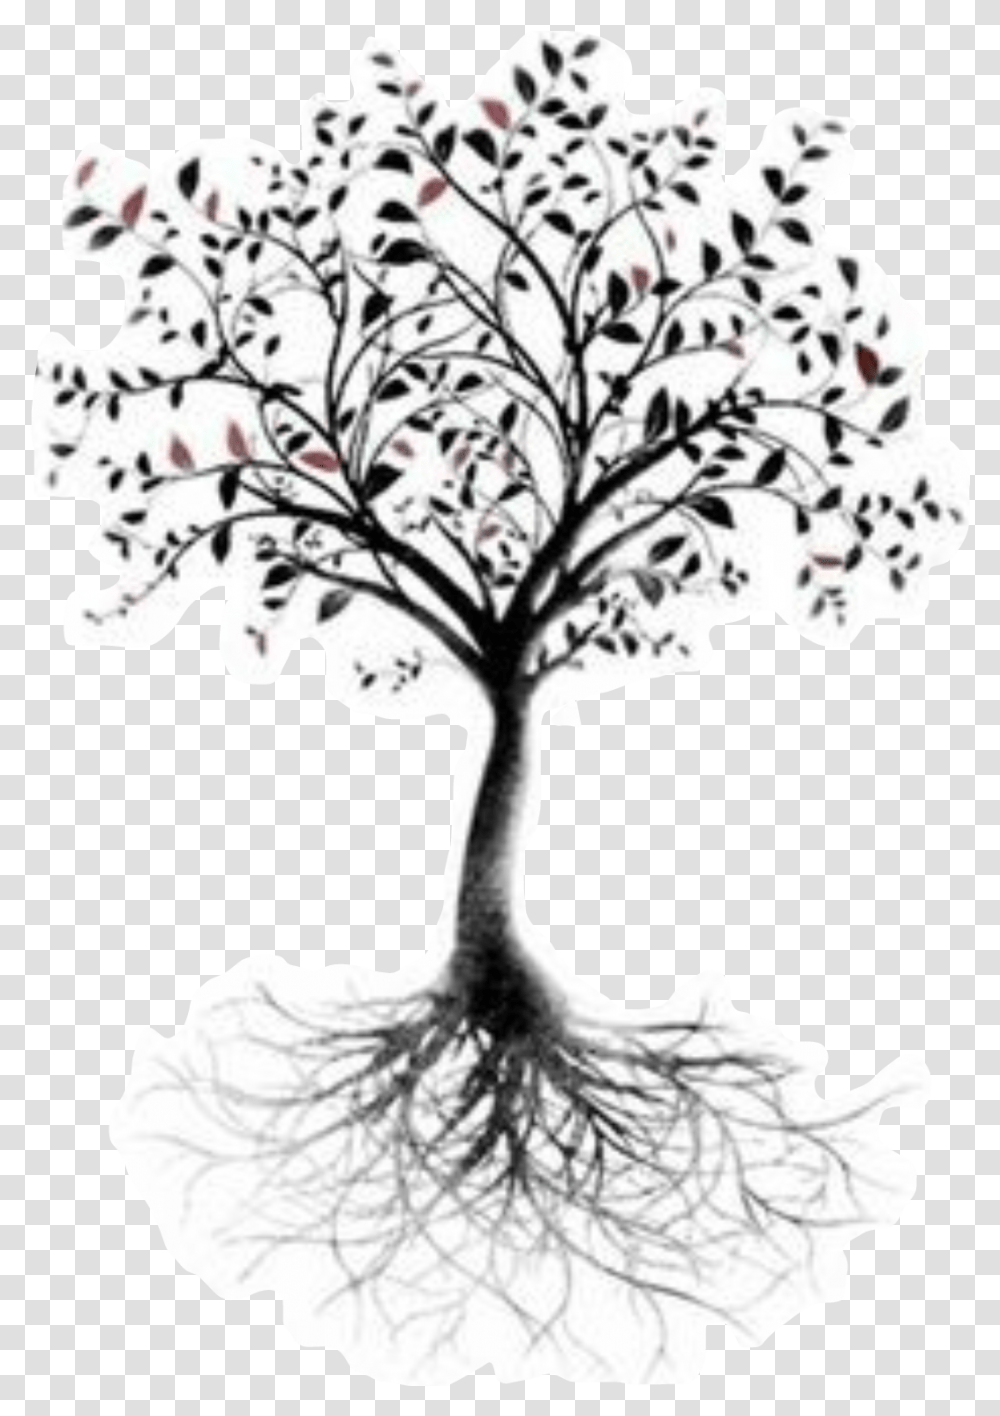 Tree Of Life Root Tattoo Branch Tattoo Of A Tree With Roots, Plant, Flower, Blossom, Panther Transparent Png